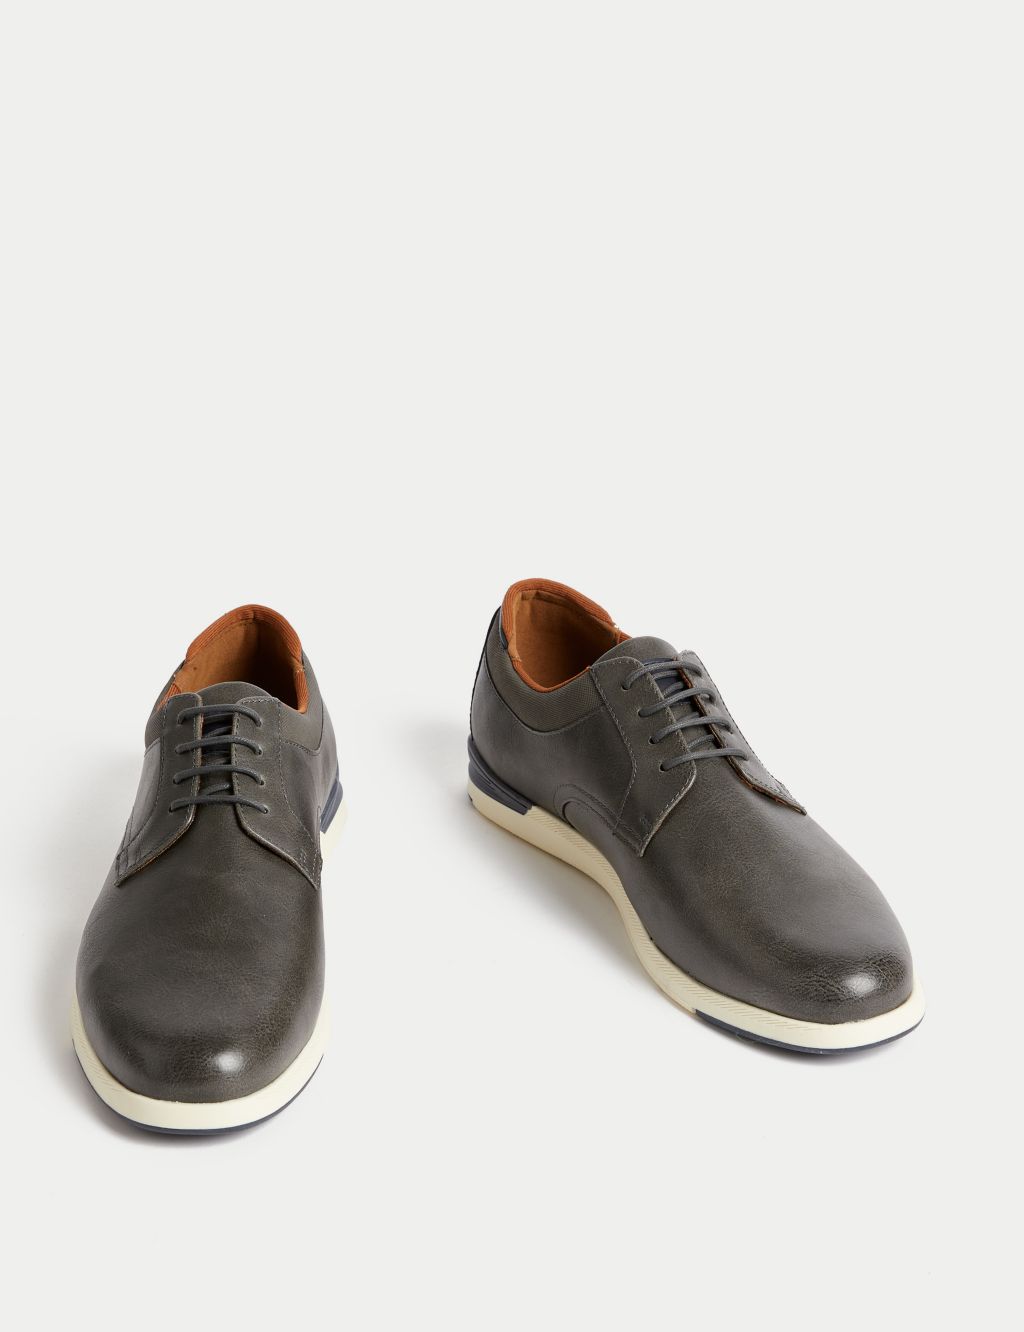 Derby Shoes image 2